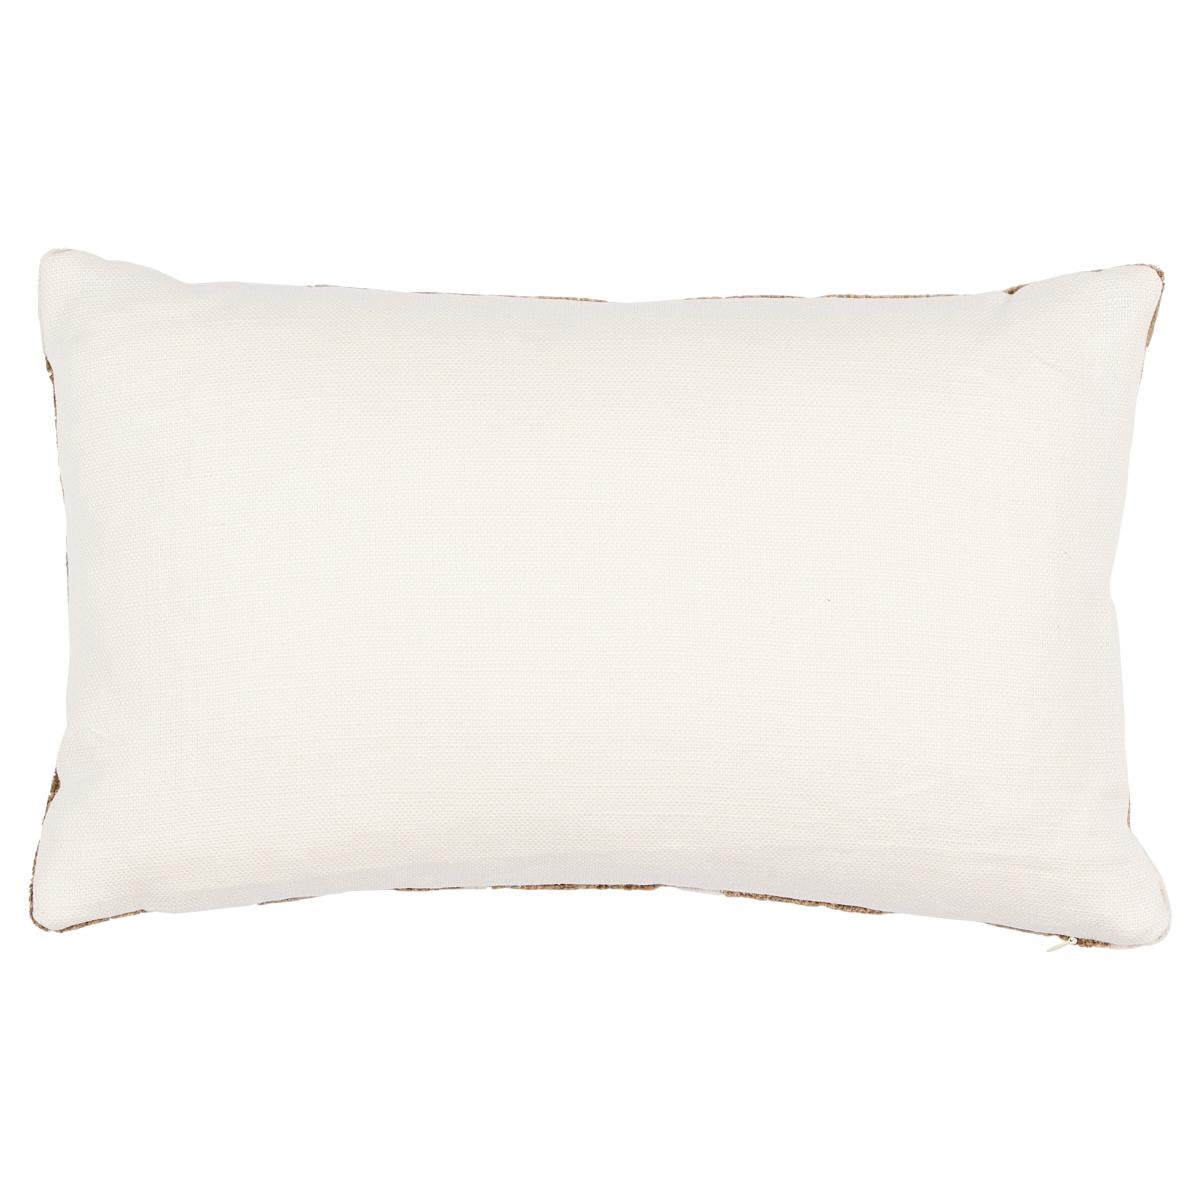 This pillow features Tutsi Velvet by David Kaihoi for Schumacher with a knife edge finish. Tutsi Velvet, designed by David Kaihoi, is a hard-wearing yet sophisticated heavyweight fabric with both cut and loop pile for added texture and depth. The